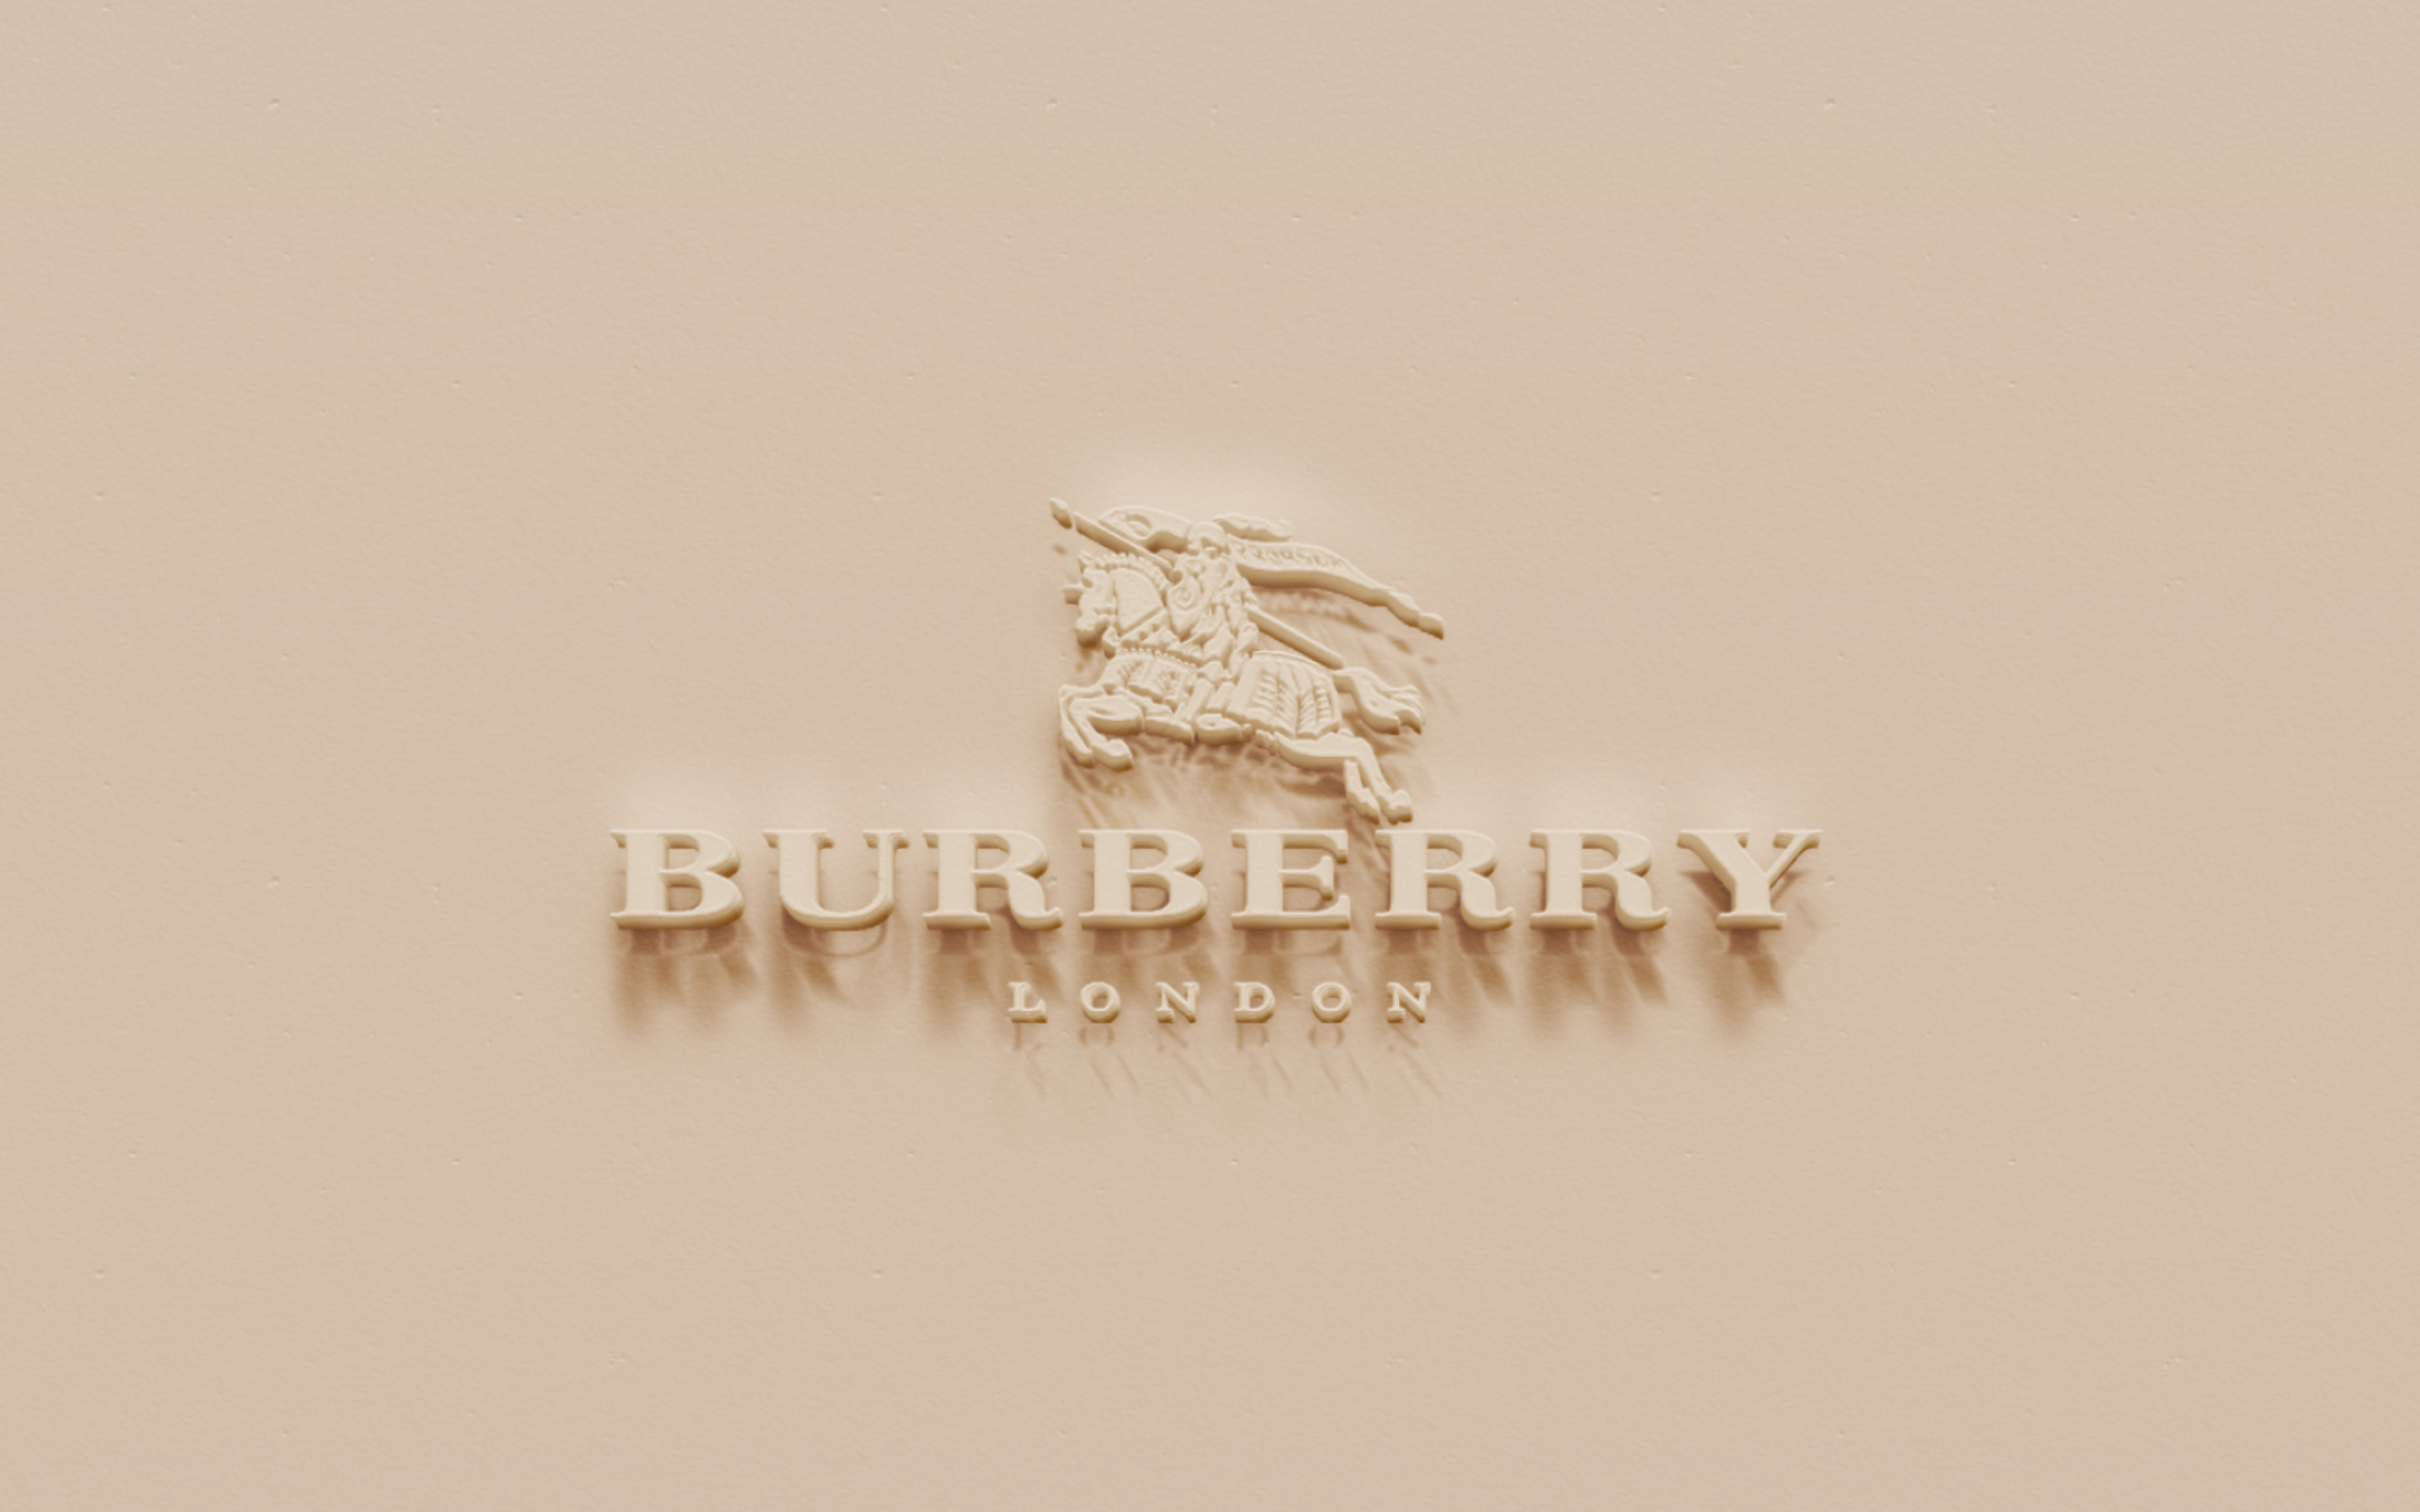 Burberry: The Equestrian Knight Logo created in 1901, The symbol of purity, nobleness and honor. 2560x1600 HD Wallpaper.